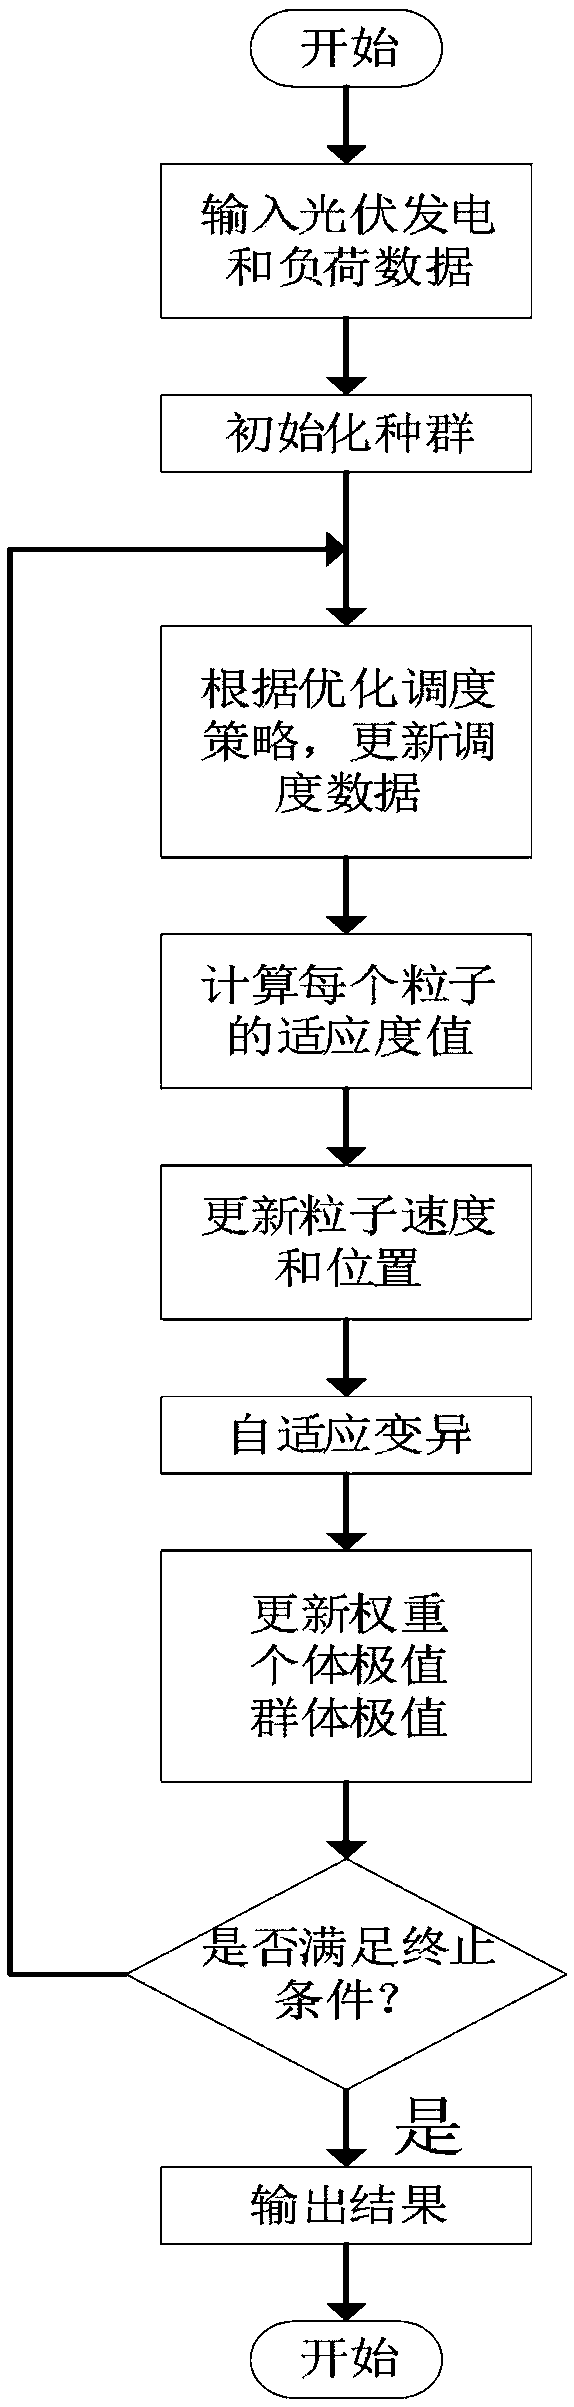 Method and system for optimized dispatching of economic benefit of photovoltaic power generation system